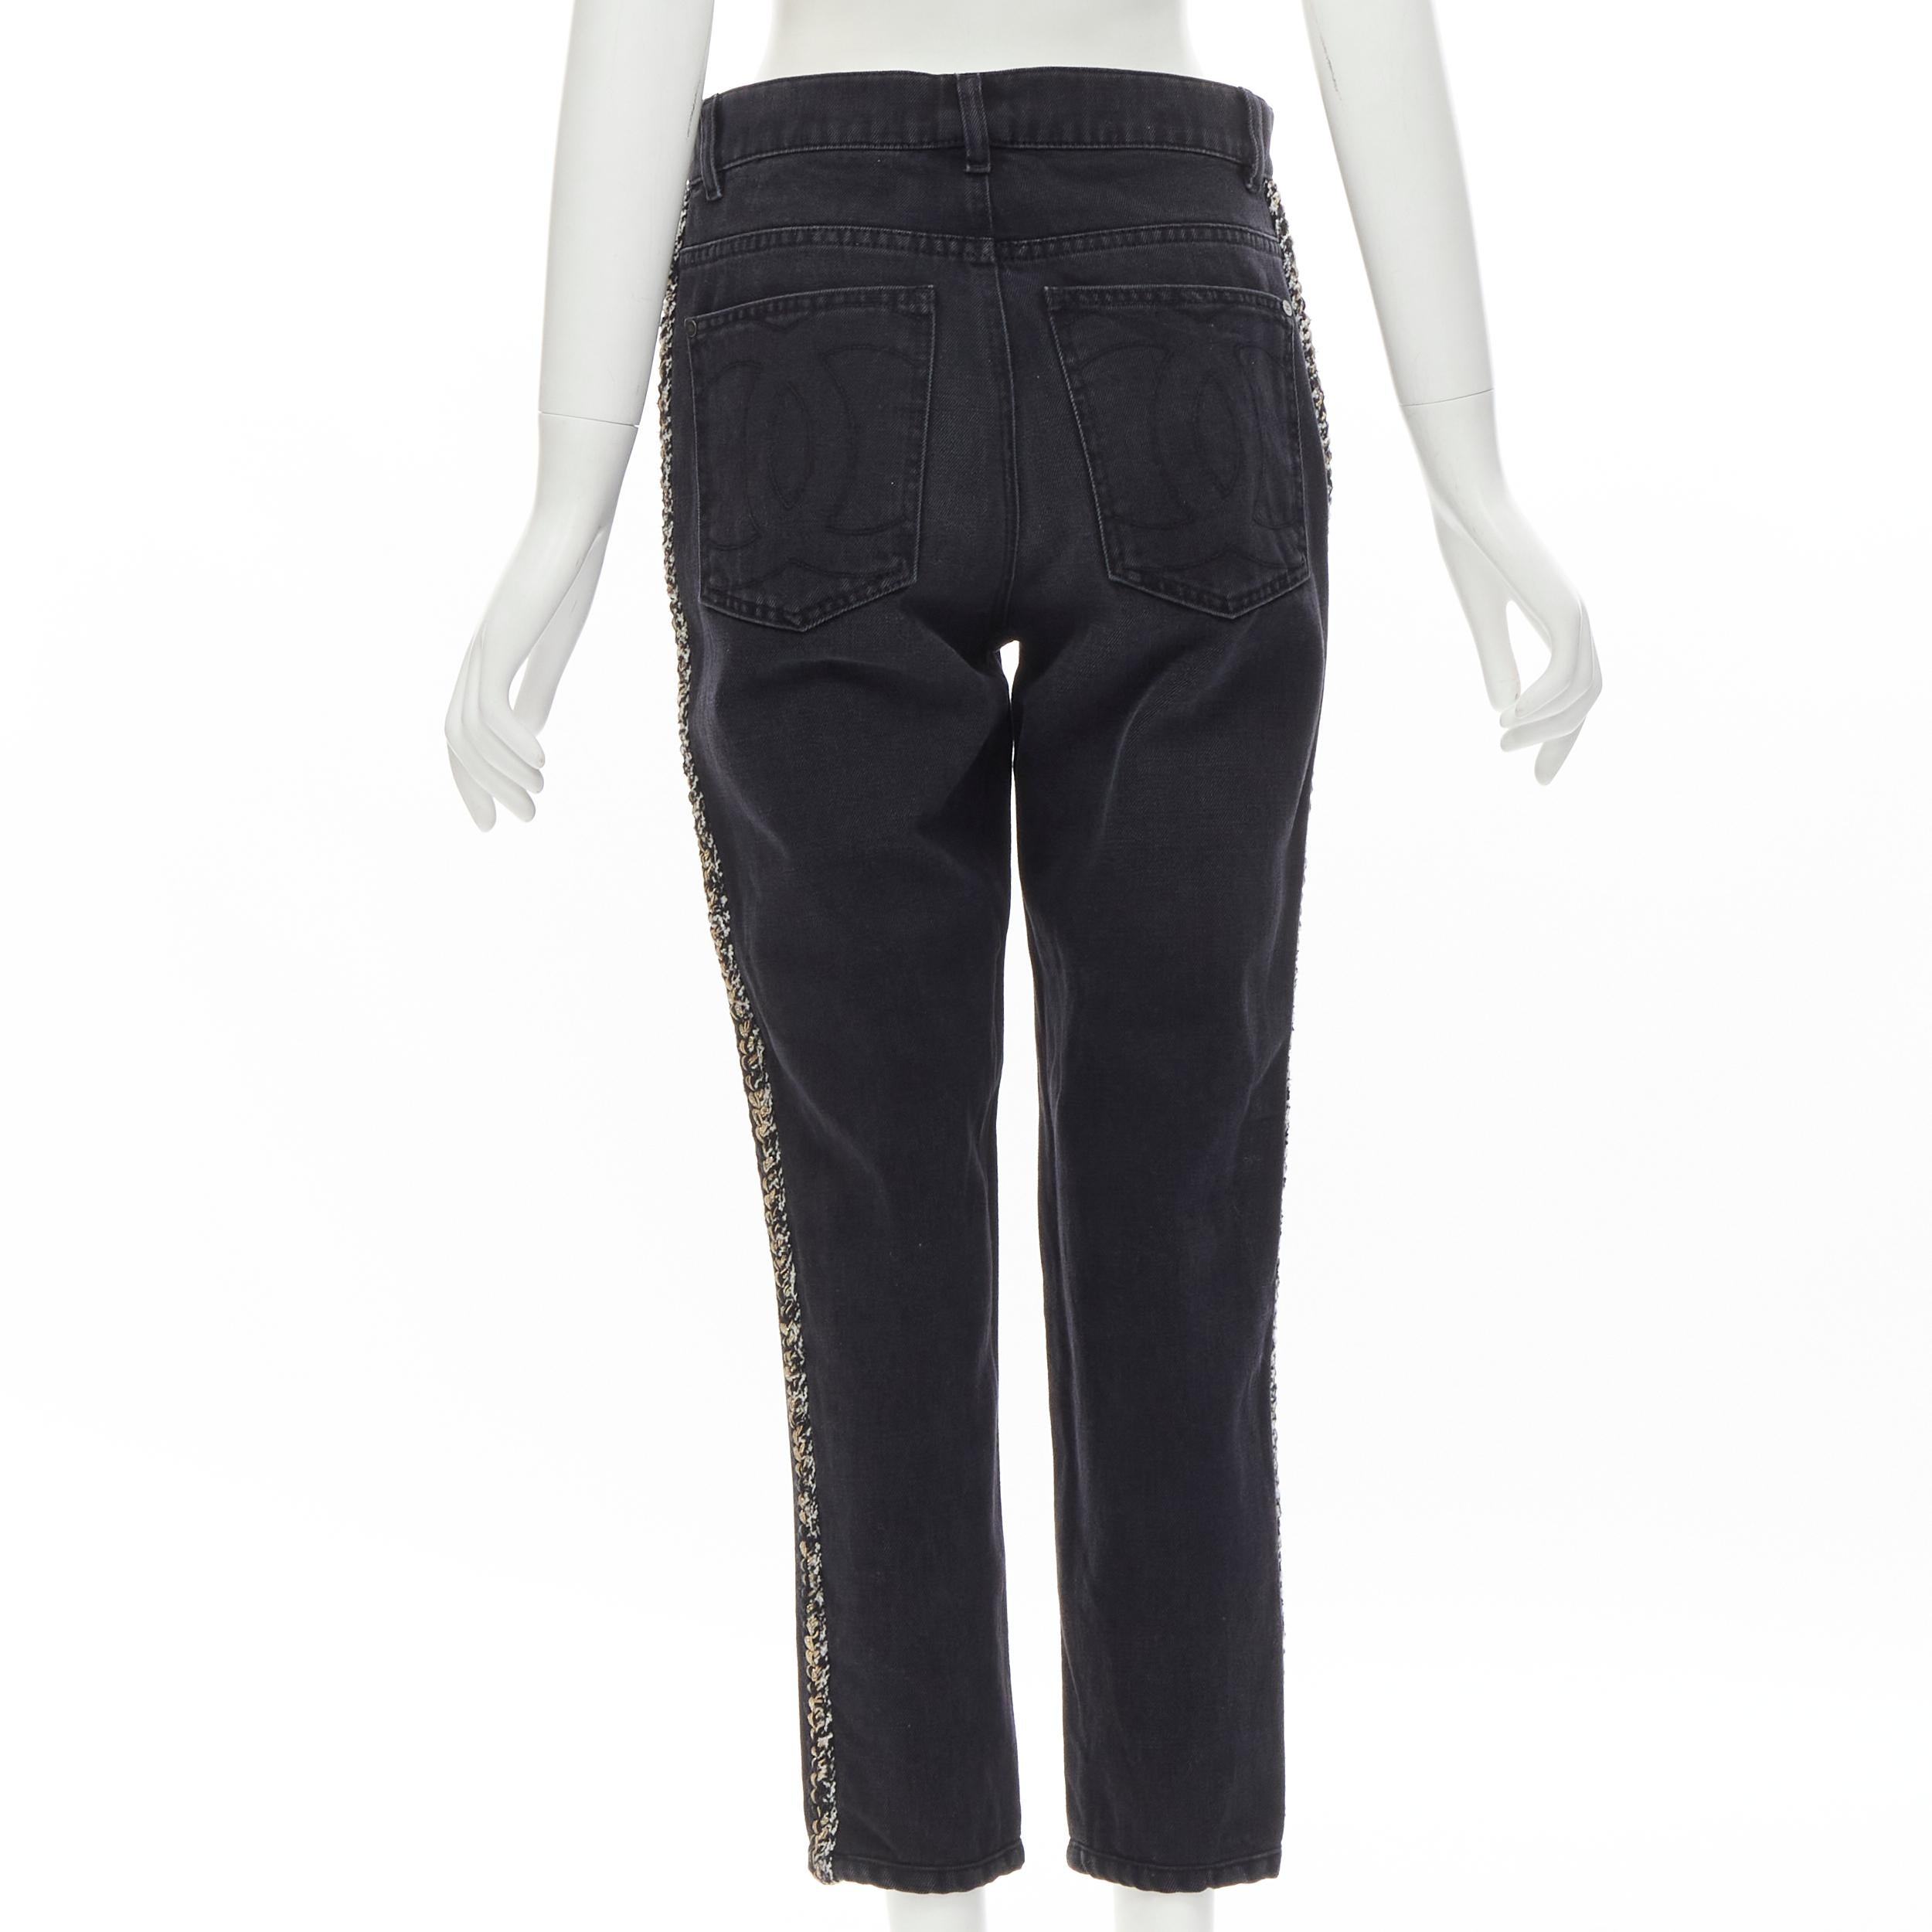 CHANEL washed black denim braided tweed trim CC pocket cropped jeans FR38 M
Brand: Chanel
Material: Cotton
Color: Black
Pattern: Solid
Closure: Zip
Extra Detail: Antique silver CC button zip fly closure. 5-pocket design. CC stitching on back pocket.